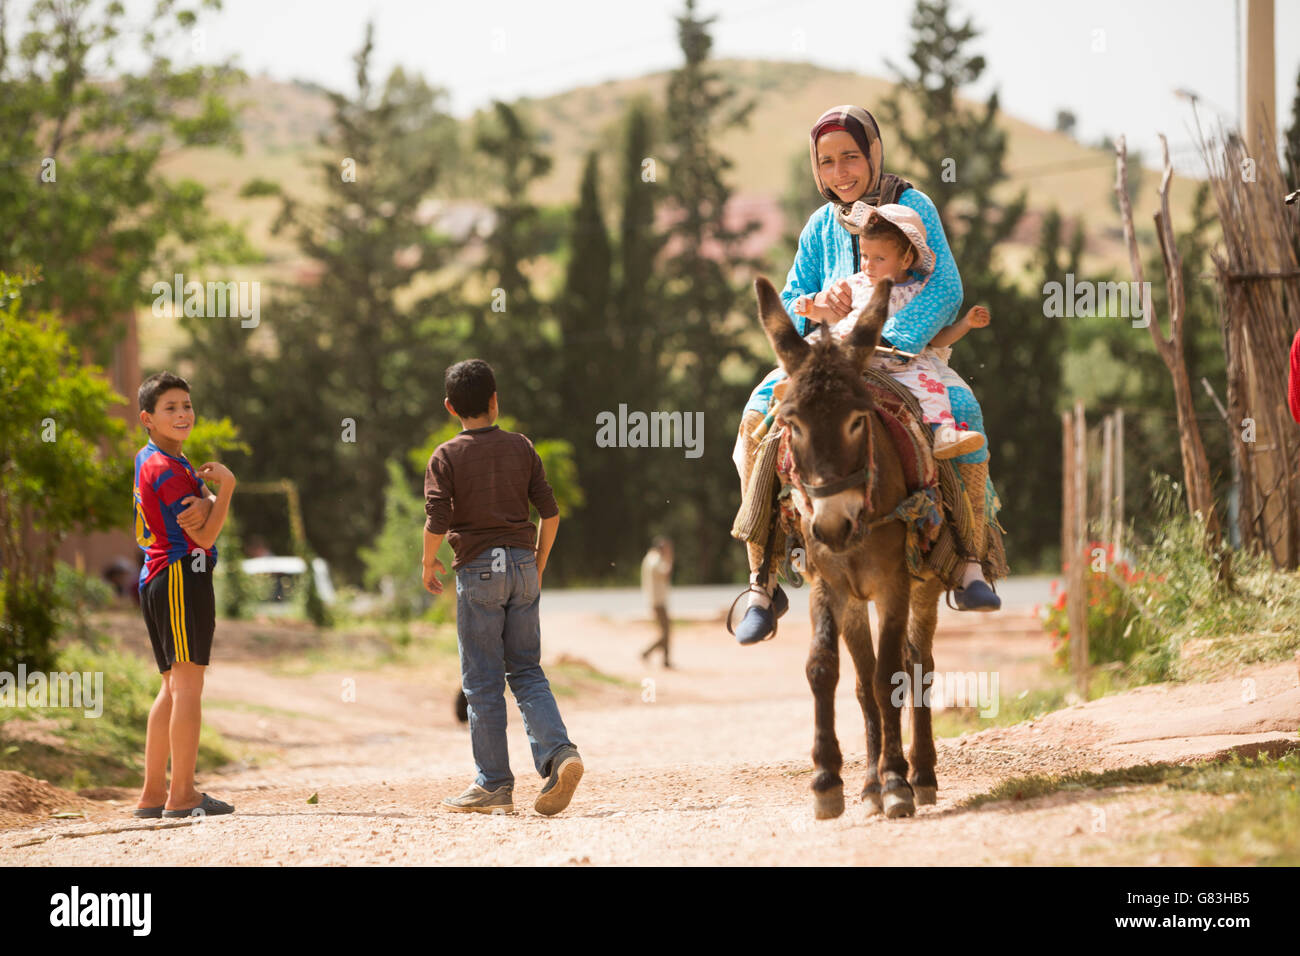 A woman and her young child ride a donkey down a dirt road in the village of Ben Khili, Morocco. Stock Photo